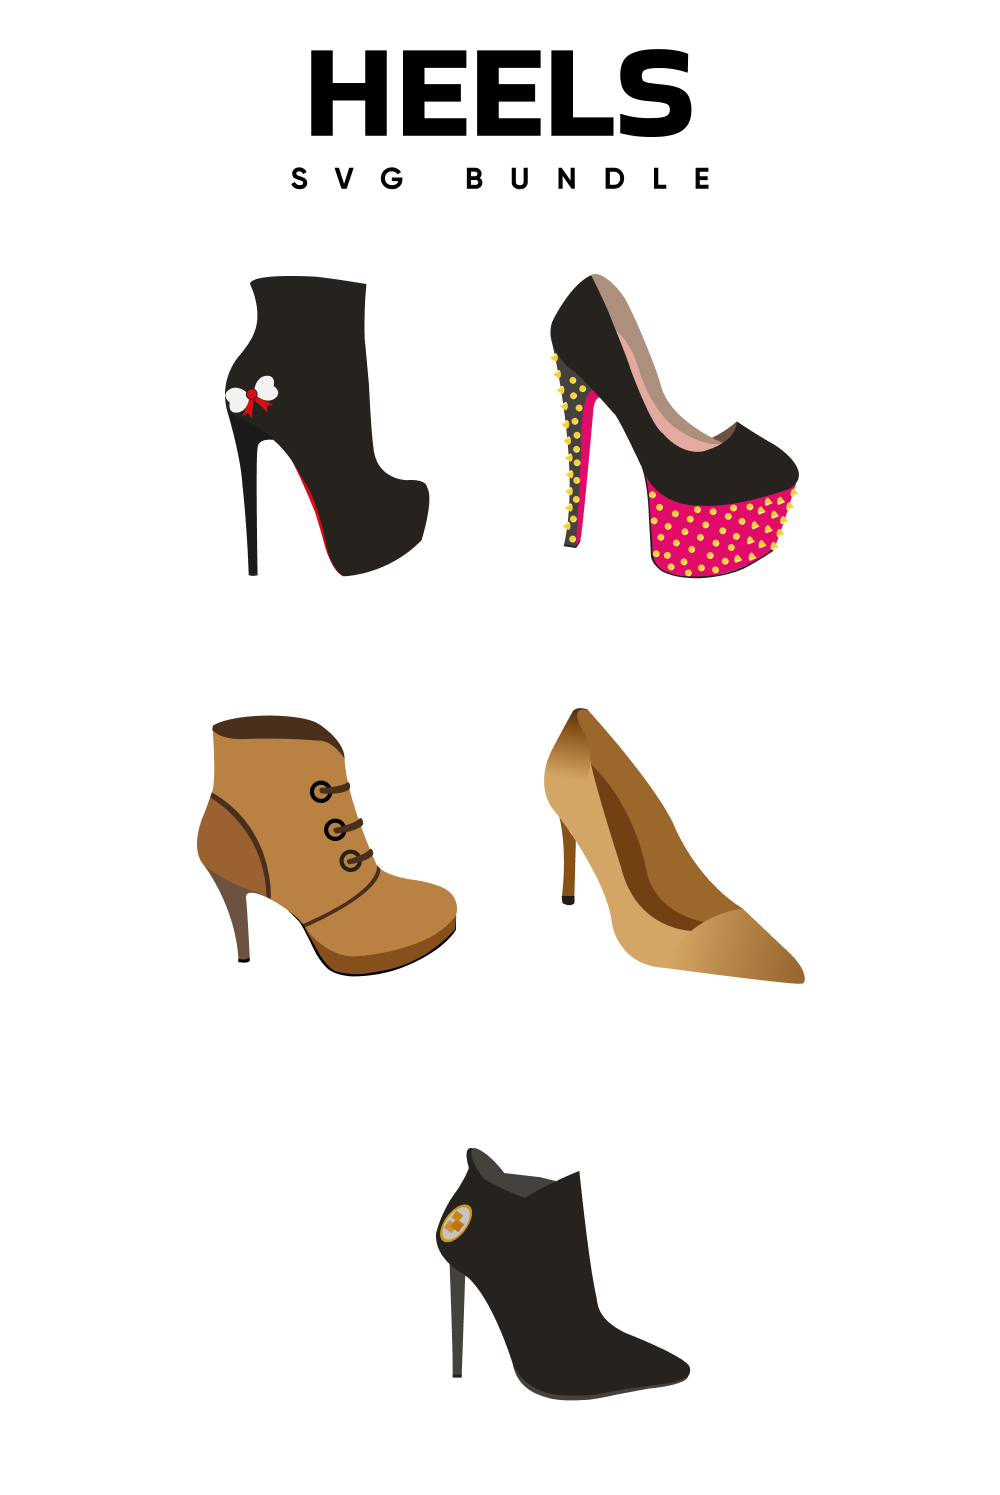 Images with heels svg.